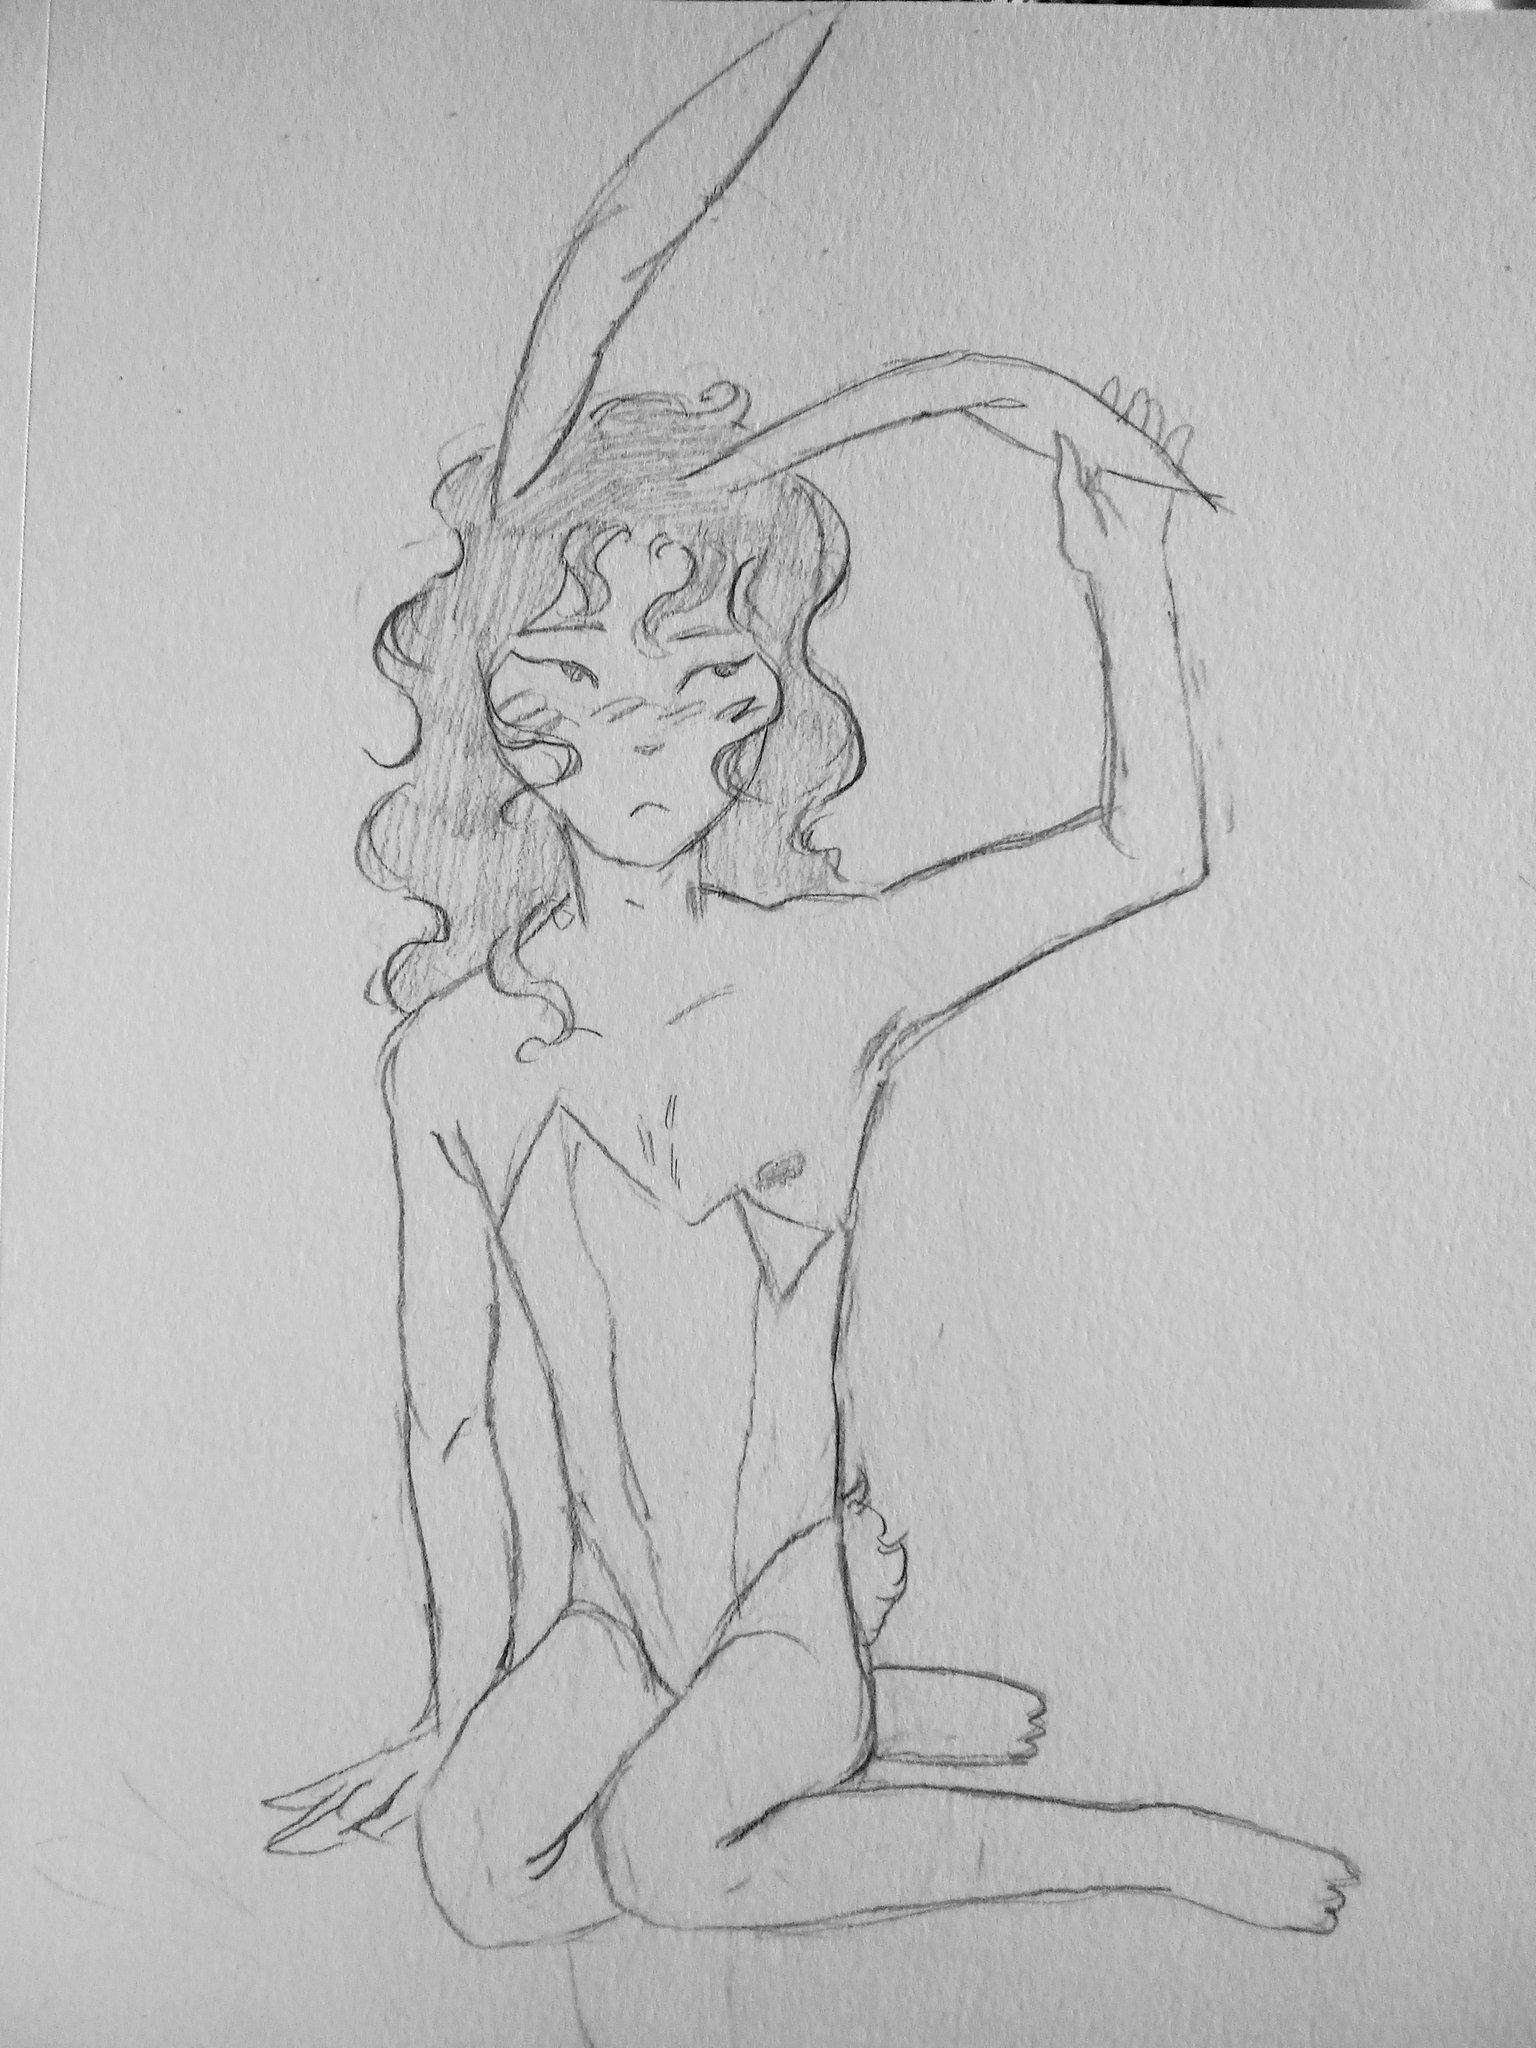 A pencil drawing. Yoshiki sitting on the floor in a sexy bunny outfit. Part of the top have meant to cover his chest has fallen, reveiling his nipple. He is reaching up with his arm to touch is bunny ear. He has long wavy hair.